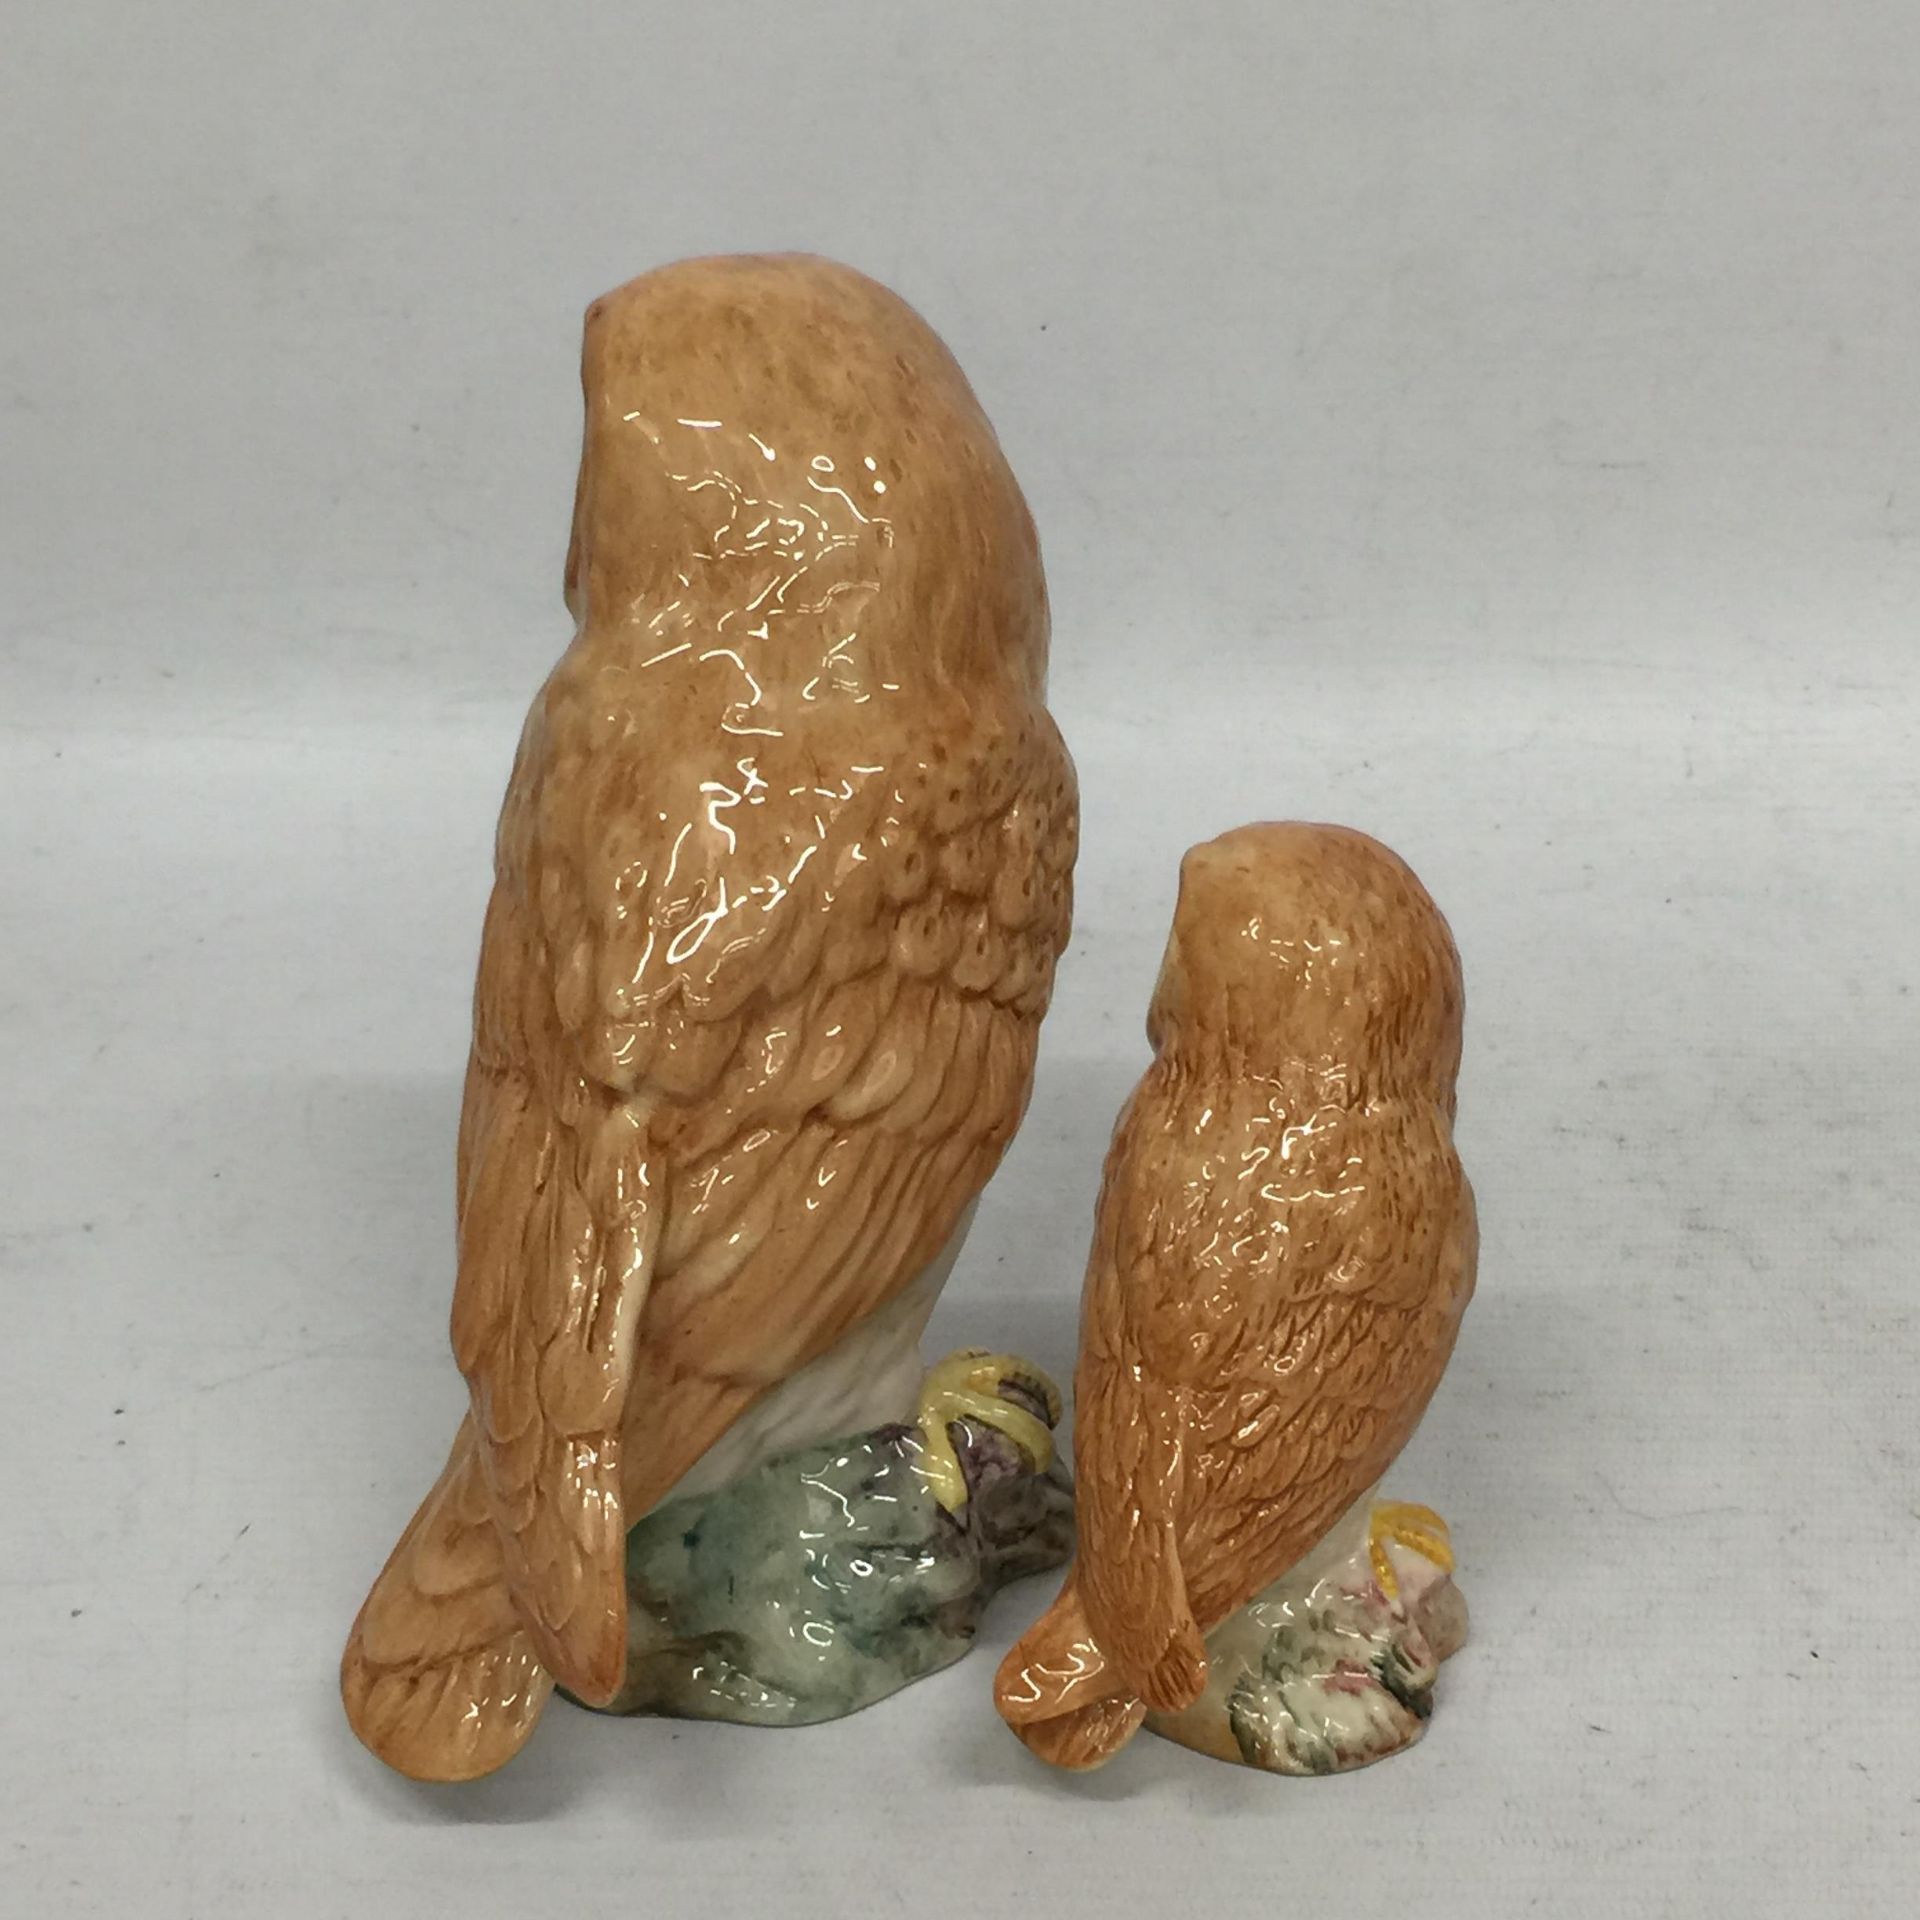 TWO BESWICK OWLS ONE LARGE AND ONE SMALL - Image 3 of 4